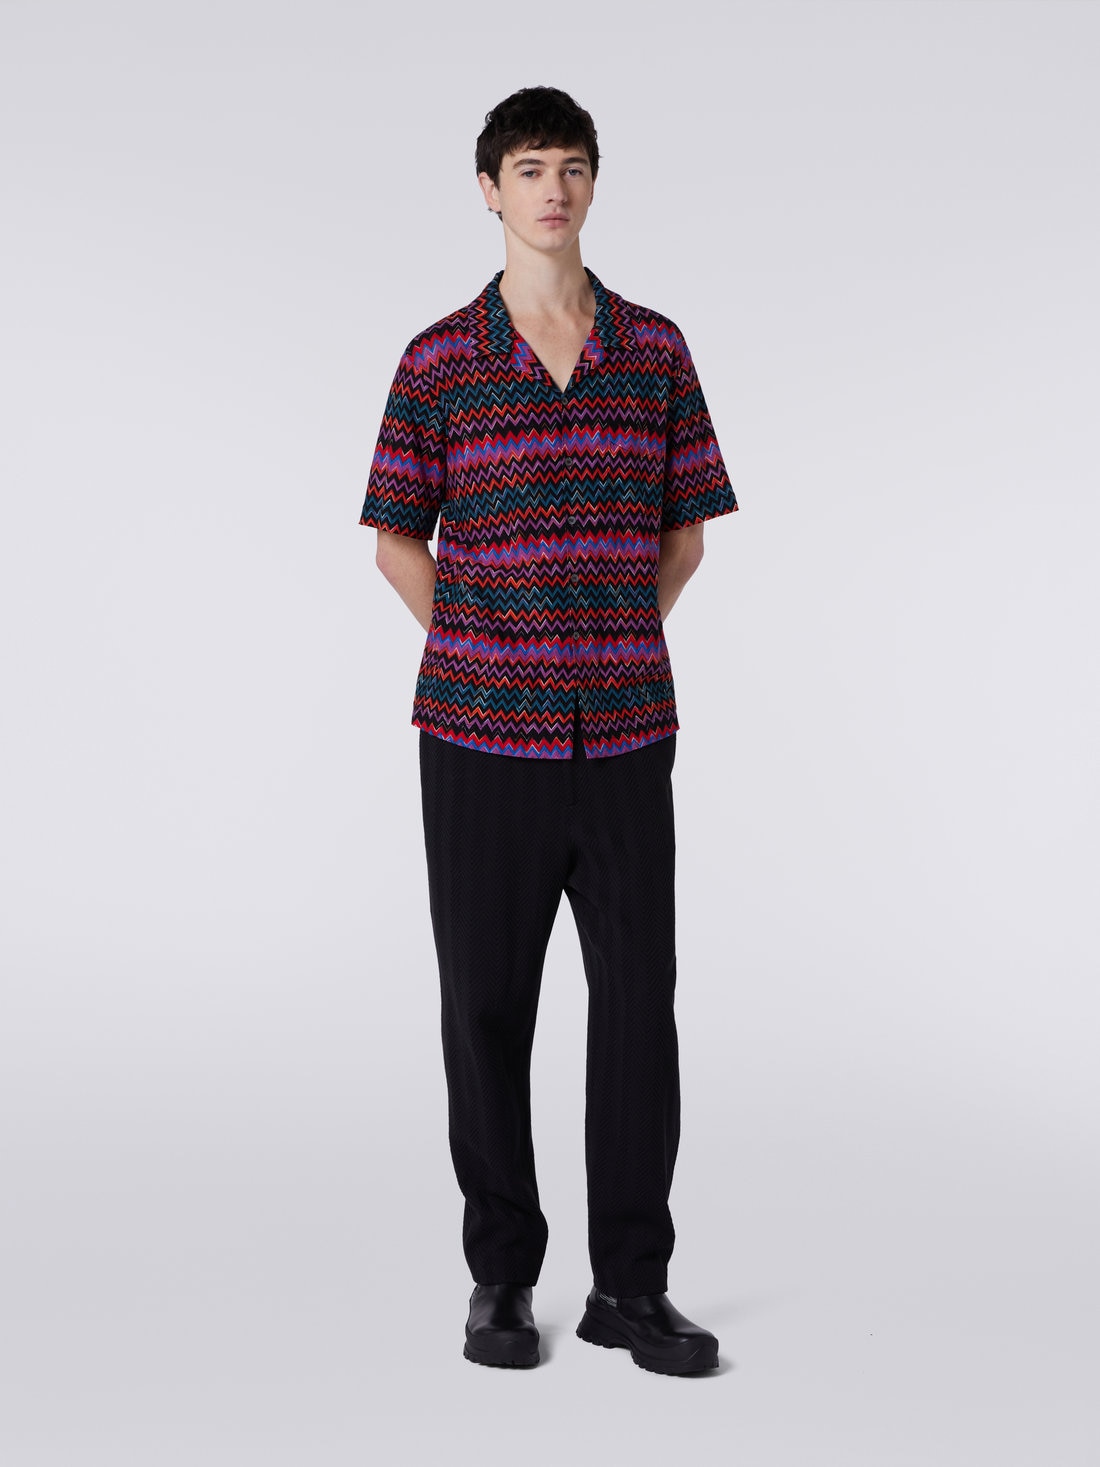 Short-sleeved bowling shirt in zigzag cotton and viscose, Black    - US23WJ08BR00OUSM8WN - 1